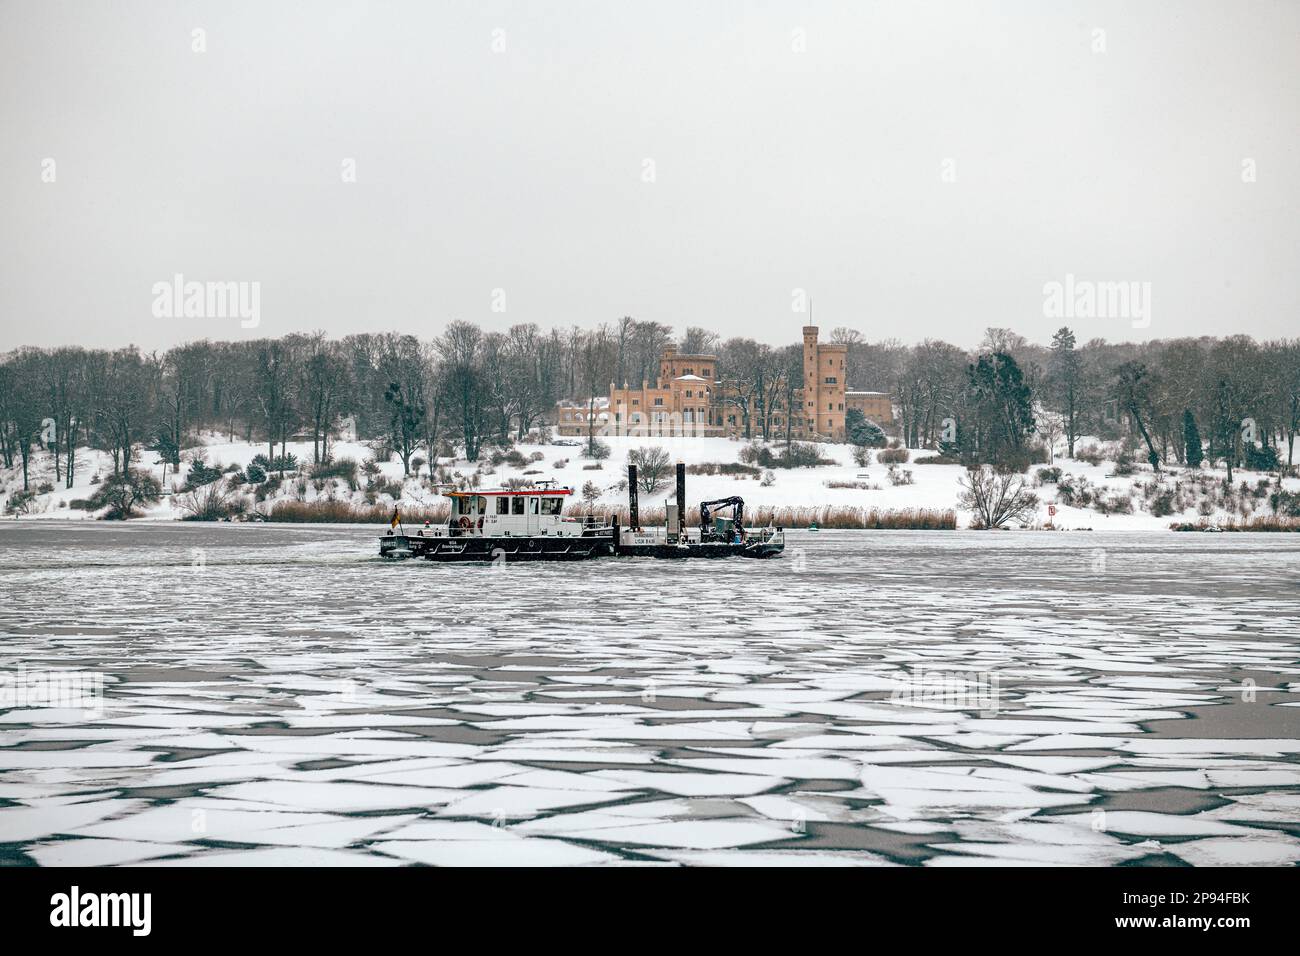 Germany, Brandenburg, Potsdam, view of Babelsberg castle from Glienicke bridge in winter with Havel river frozen over and icebreaker in foreground Stock Photo